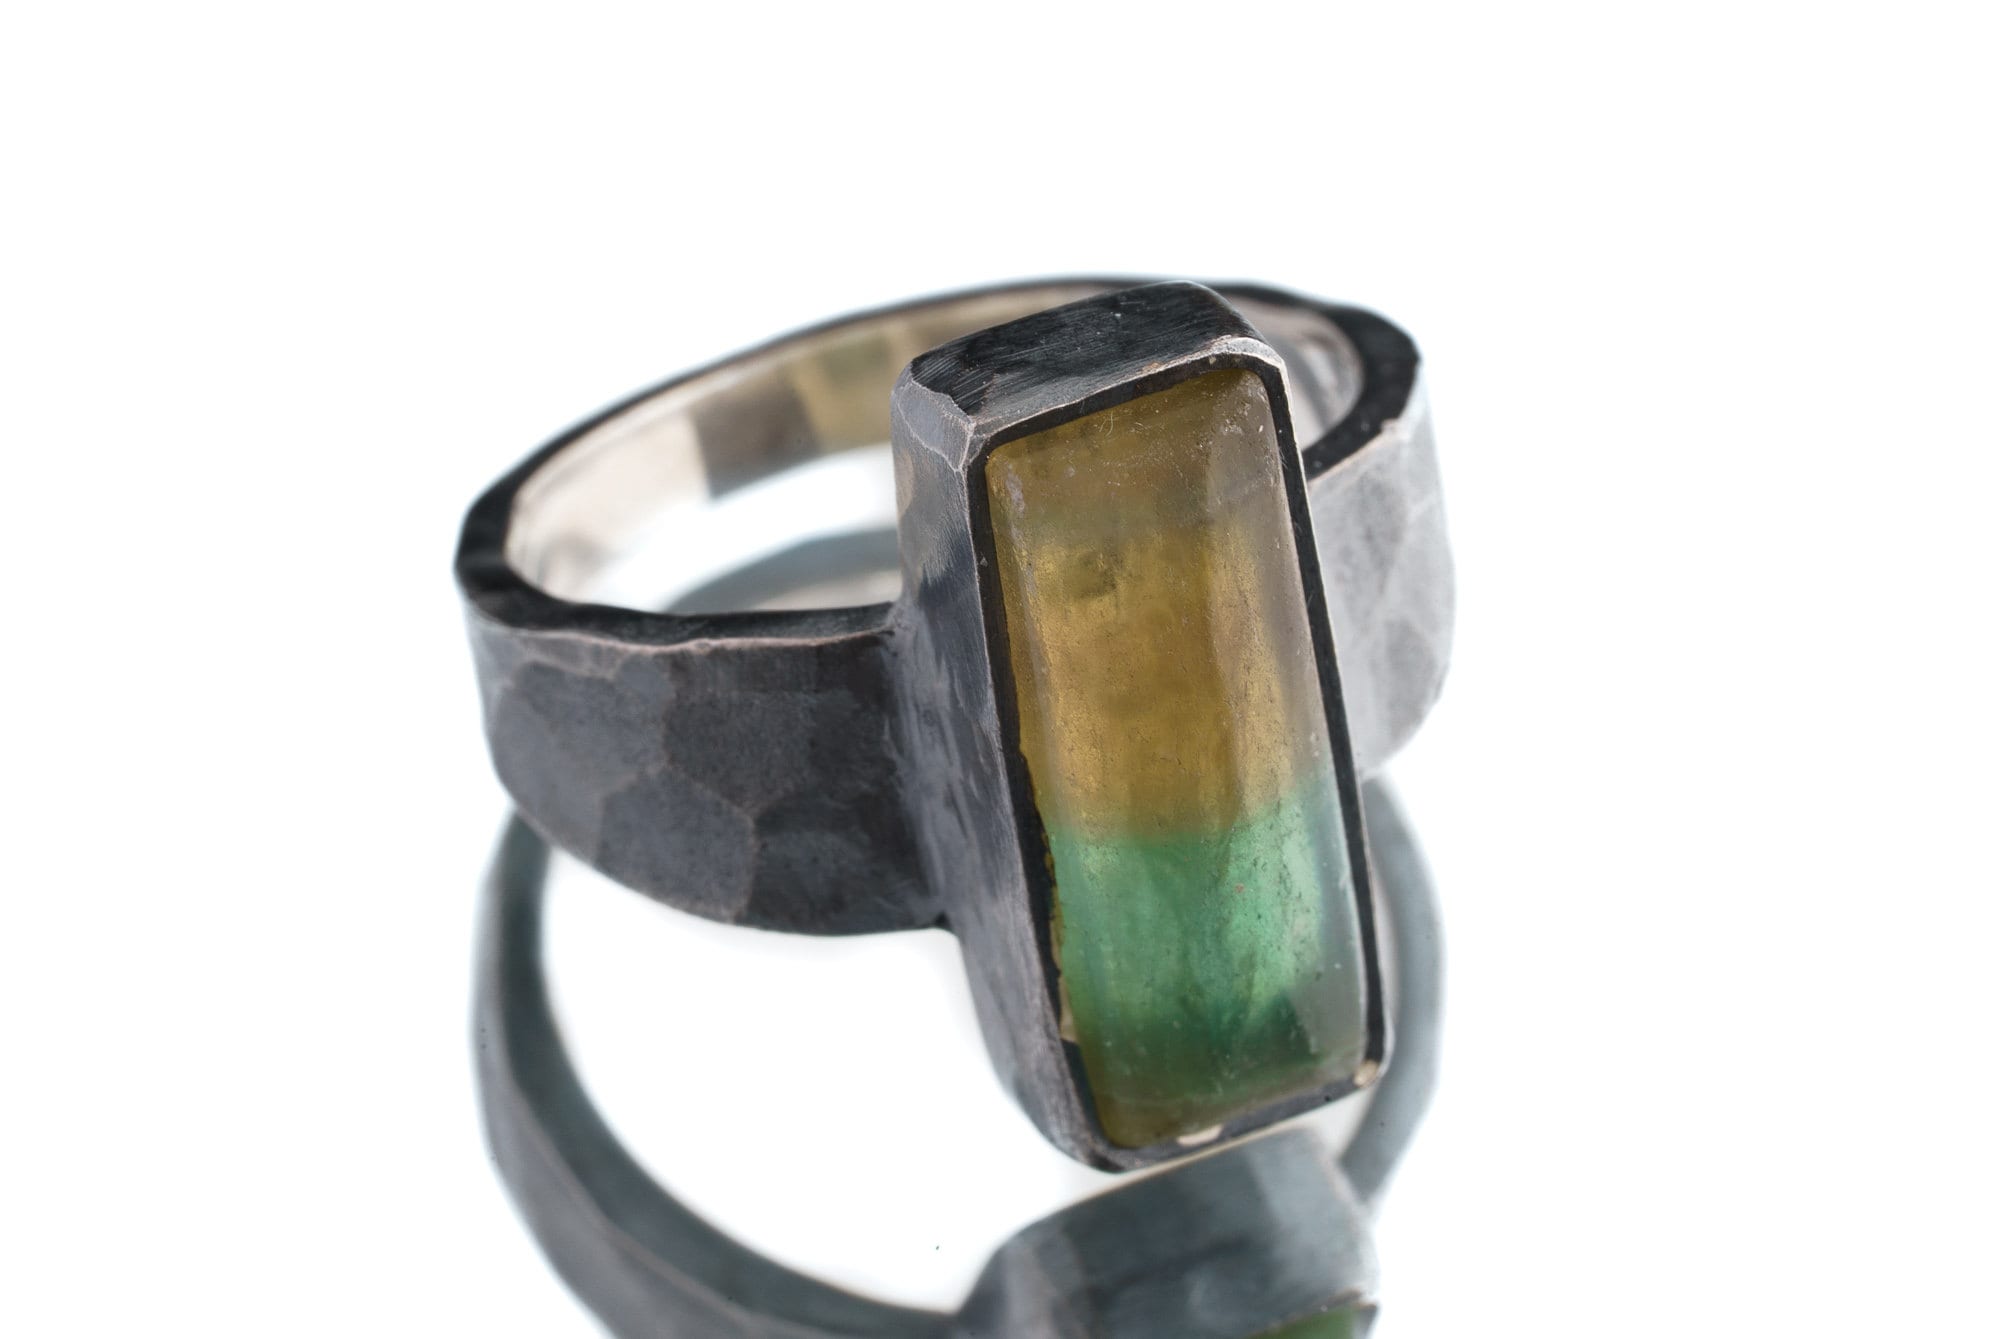 Bicolour Fluorite Cabochon - Men's / Unisex Large Crystal Ring - Size 8 1/2 US - 925 Sterling Silver - Hammer Textured & Oxidised